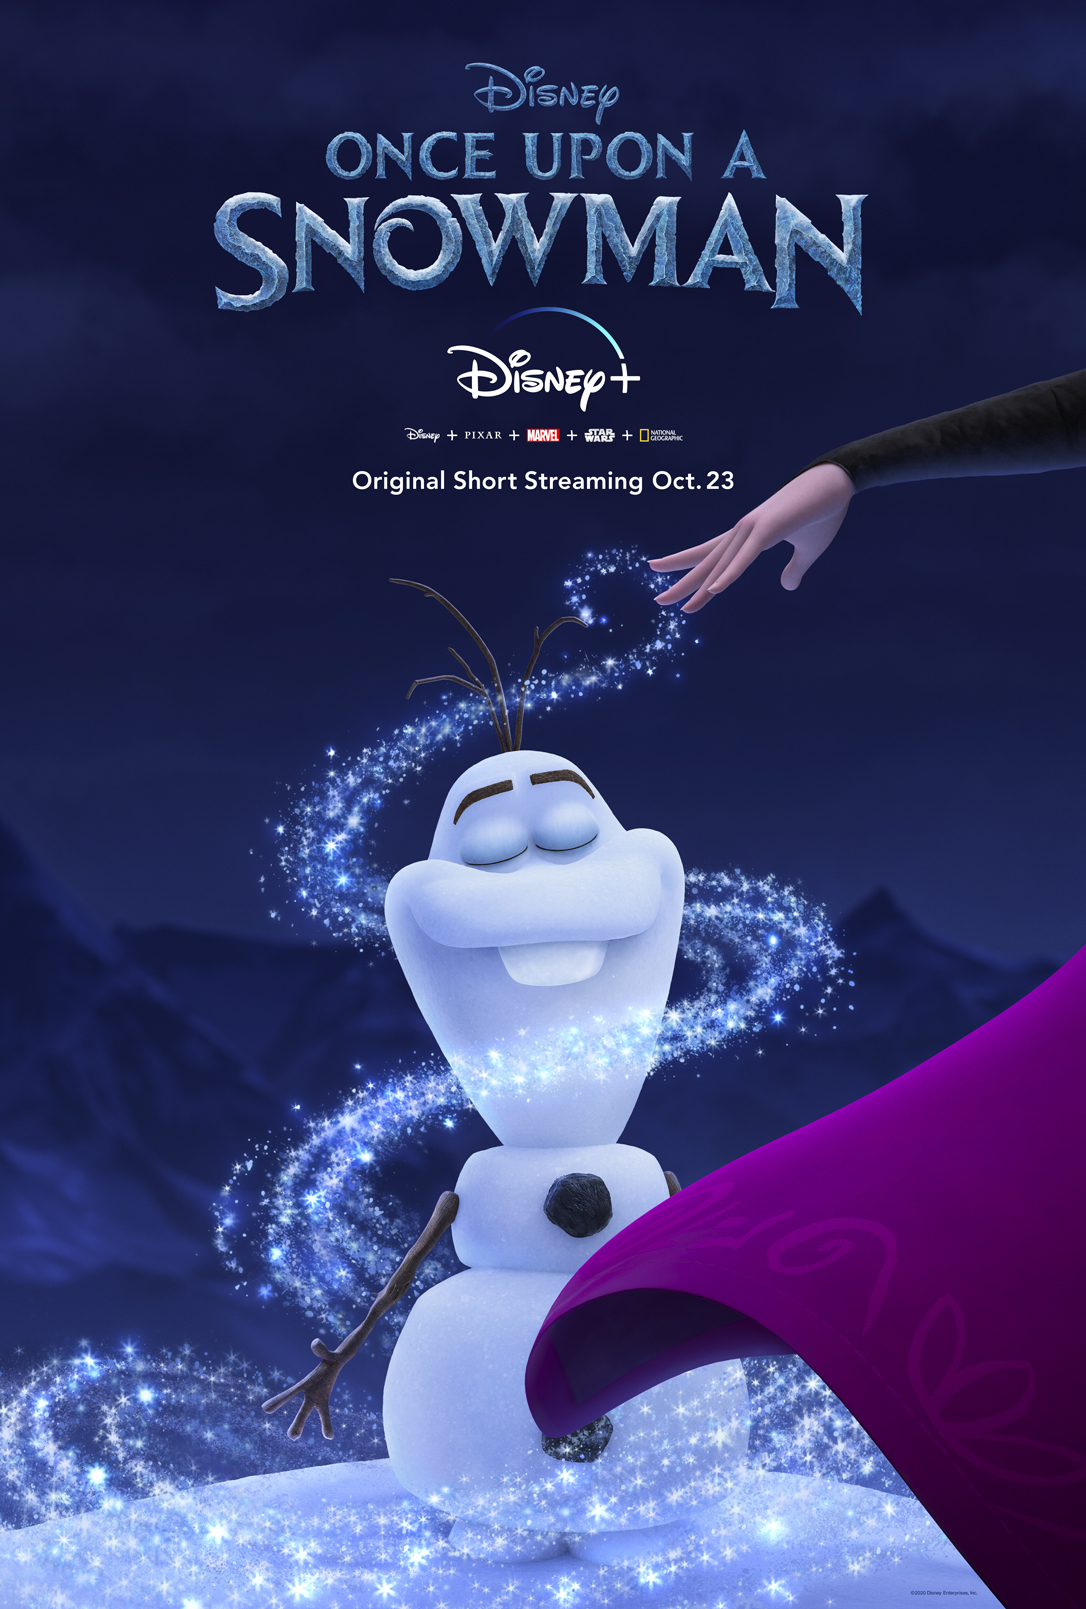 Once Upon a Snowman melts Frozen hearts — movie review